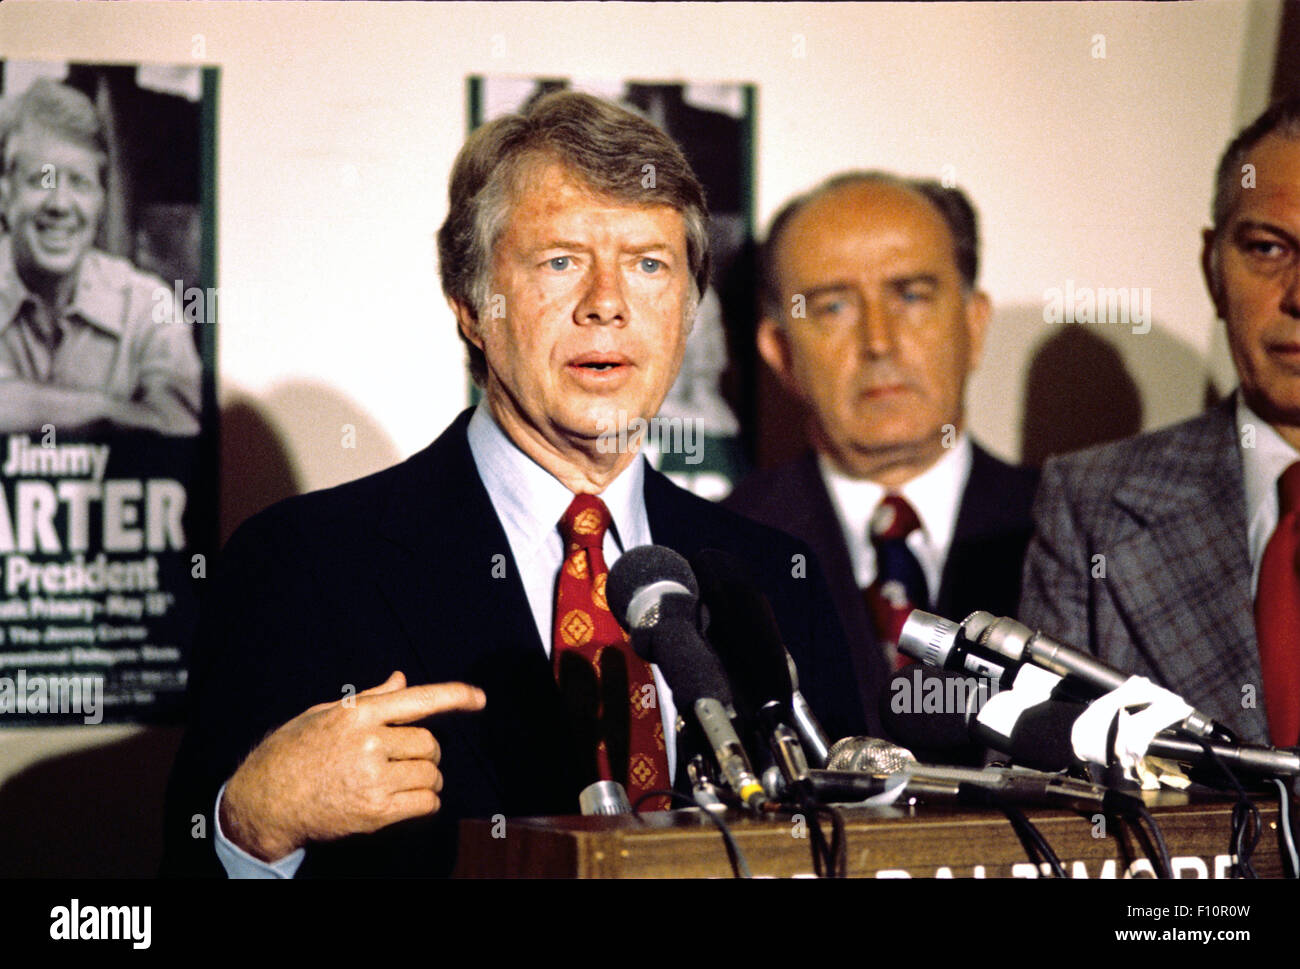 Governor Jimmy Carter (Democrat of Georgia) a candidate for the 1976 Democratic nomination for President of the United States, makes a campaign appearance in Baltimore, Maryland on May 13, 1976. Standing at right is Mayor William Donald Schaefer (Democrat of Baltimore), and Secretary of State Fred L. Wineland (Democrat of Maryland) who is partially obscured. Credit: Arnie Sachs/CNP - NO WIRE SERVICE - Stock Photo